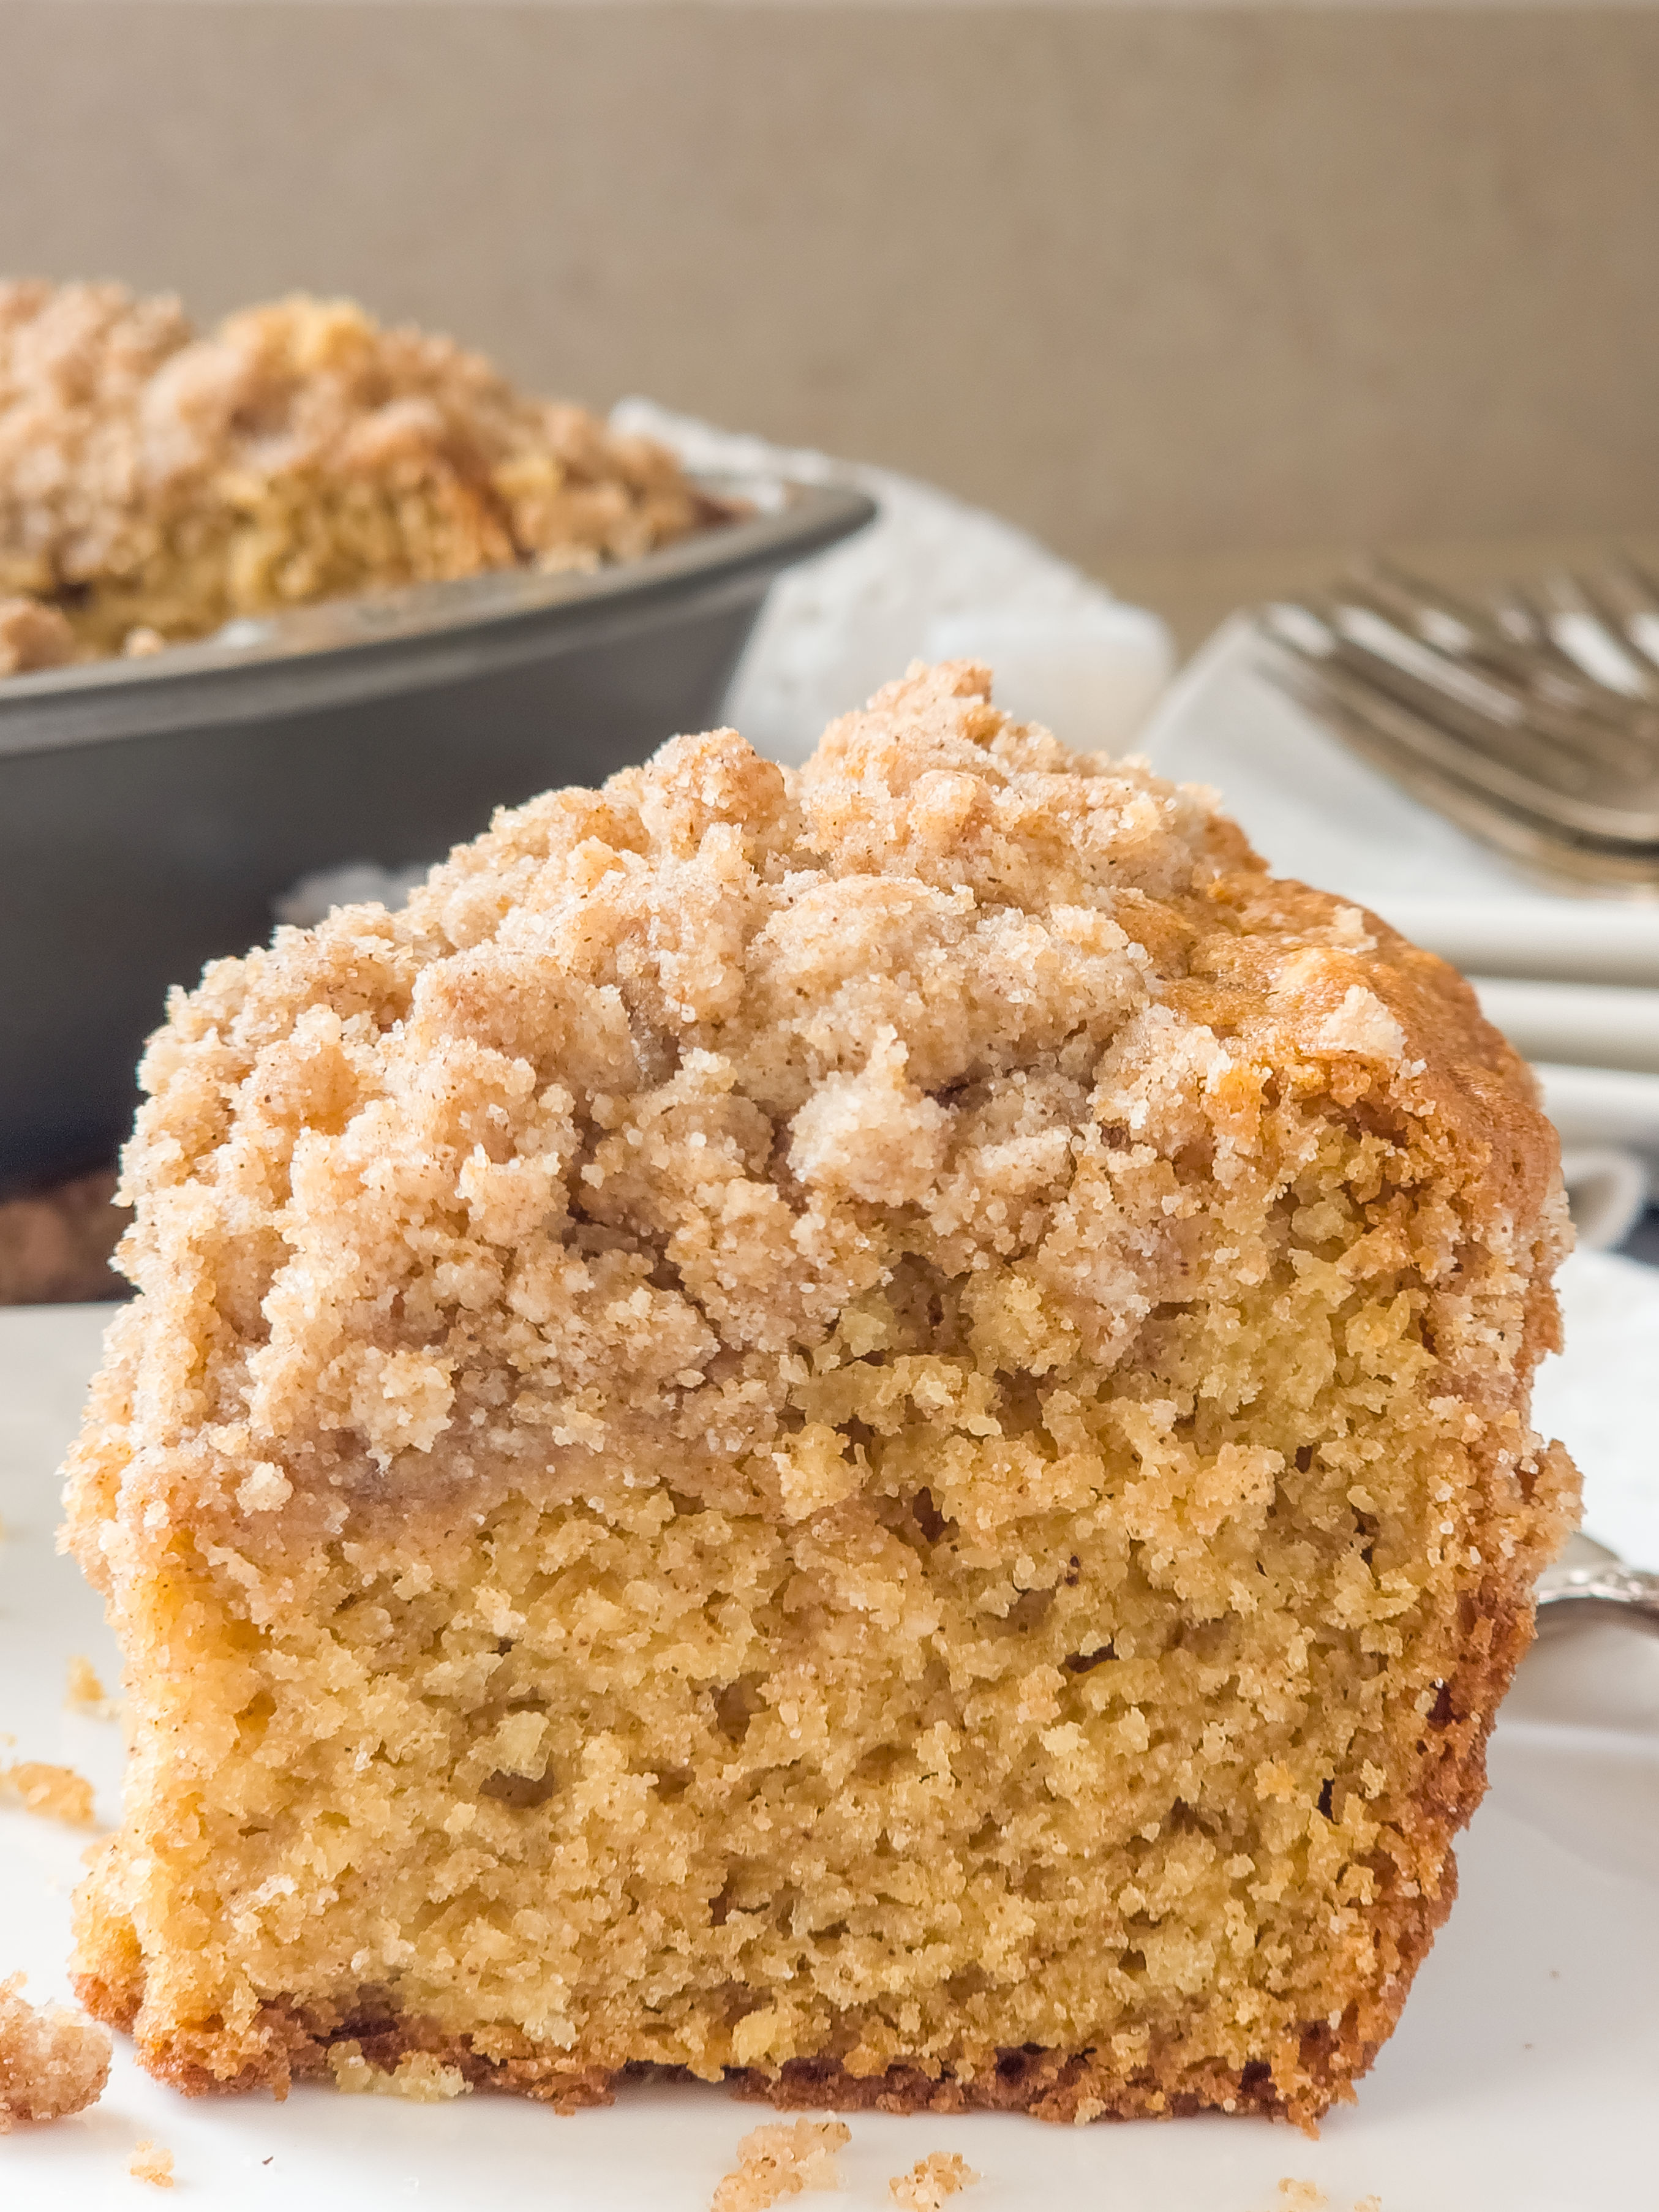 https://thereislifeafterwheat.com/wp-content/uploads/2023/04/Gluten-Free-Coffee-Cake-Recipe-4.png